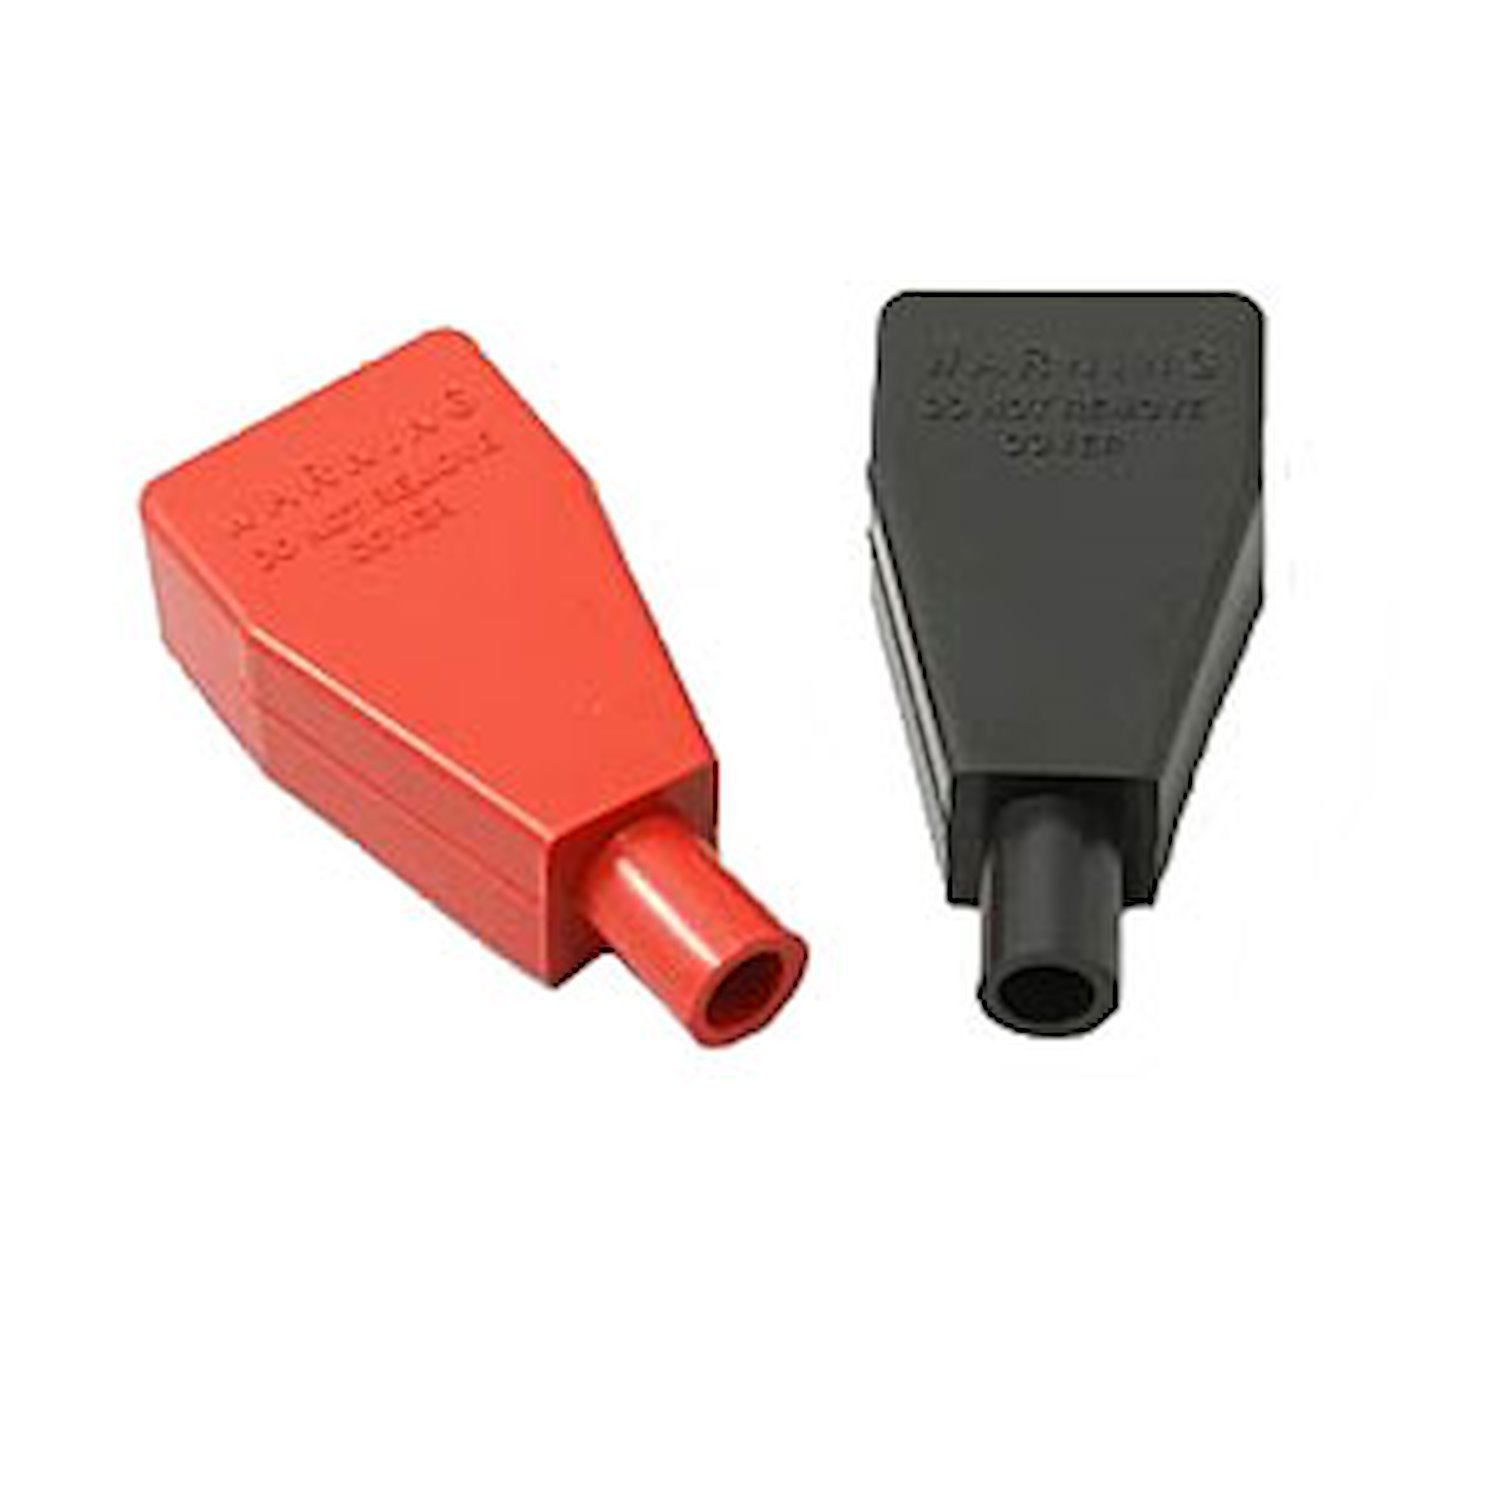 Battery Terminal Covers 2/pkg (1 red, 1 black)